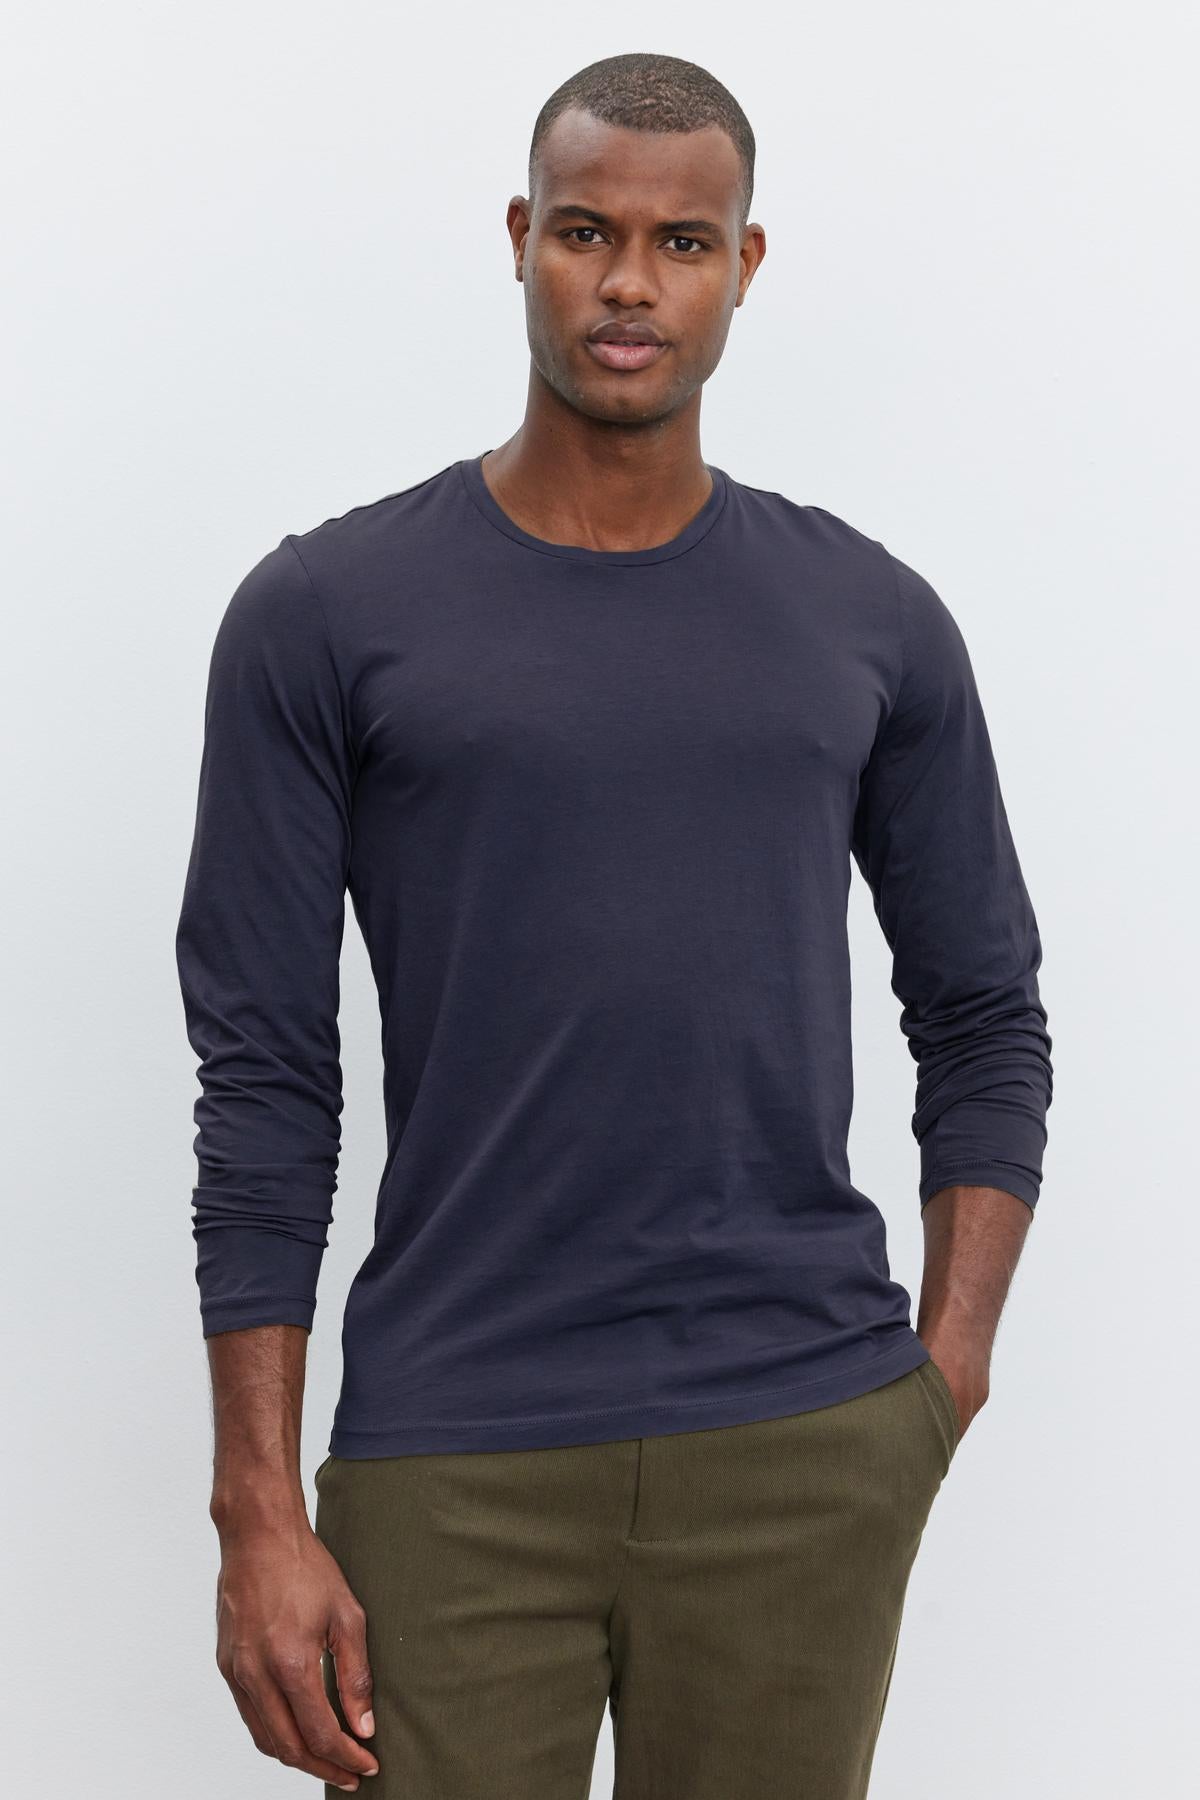 A man in a SKEETER WHISPER CLASSIC CREW NECK TEE by Velvet by Graham & Spencer and olive green pants standing against a white background.-36342439346369